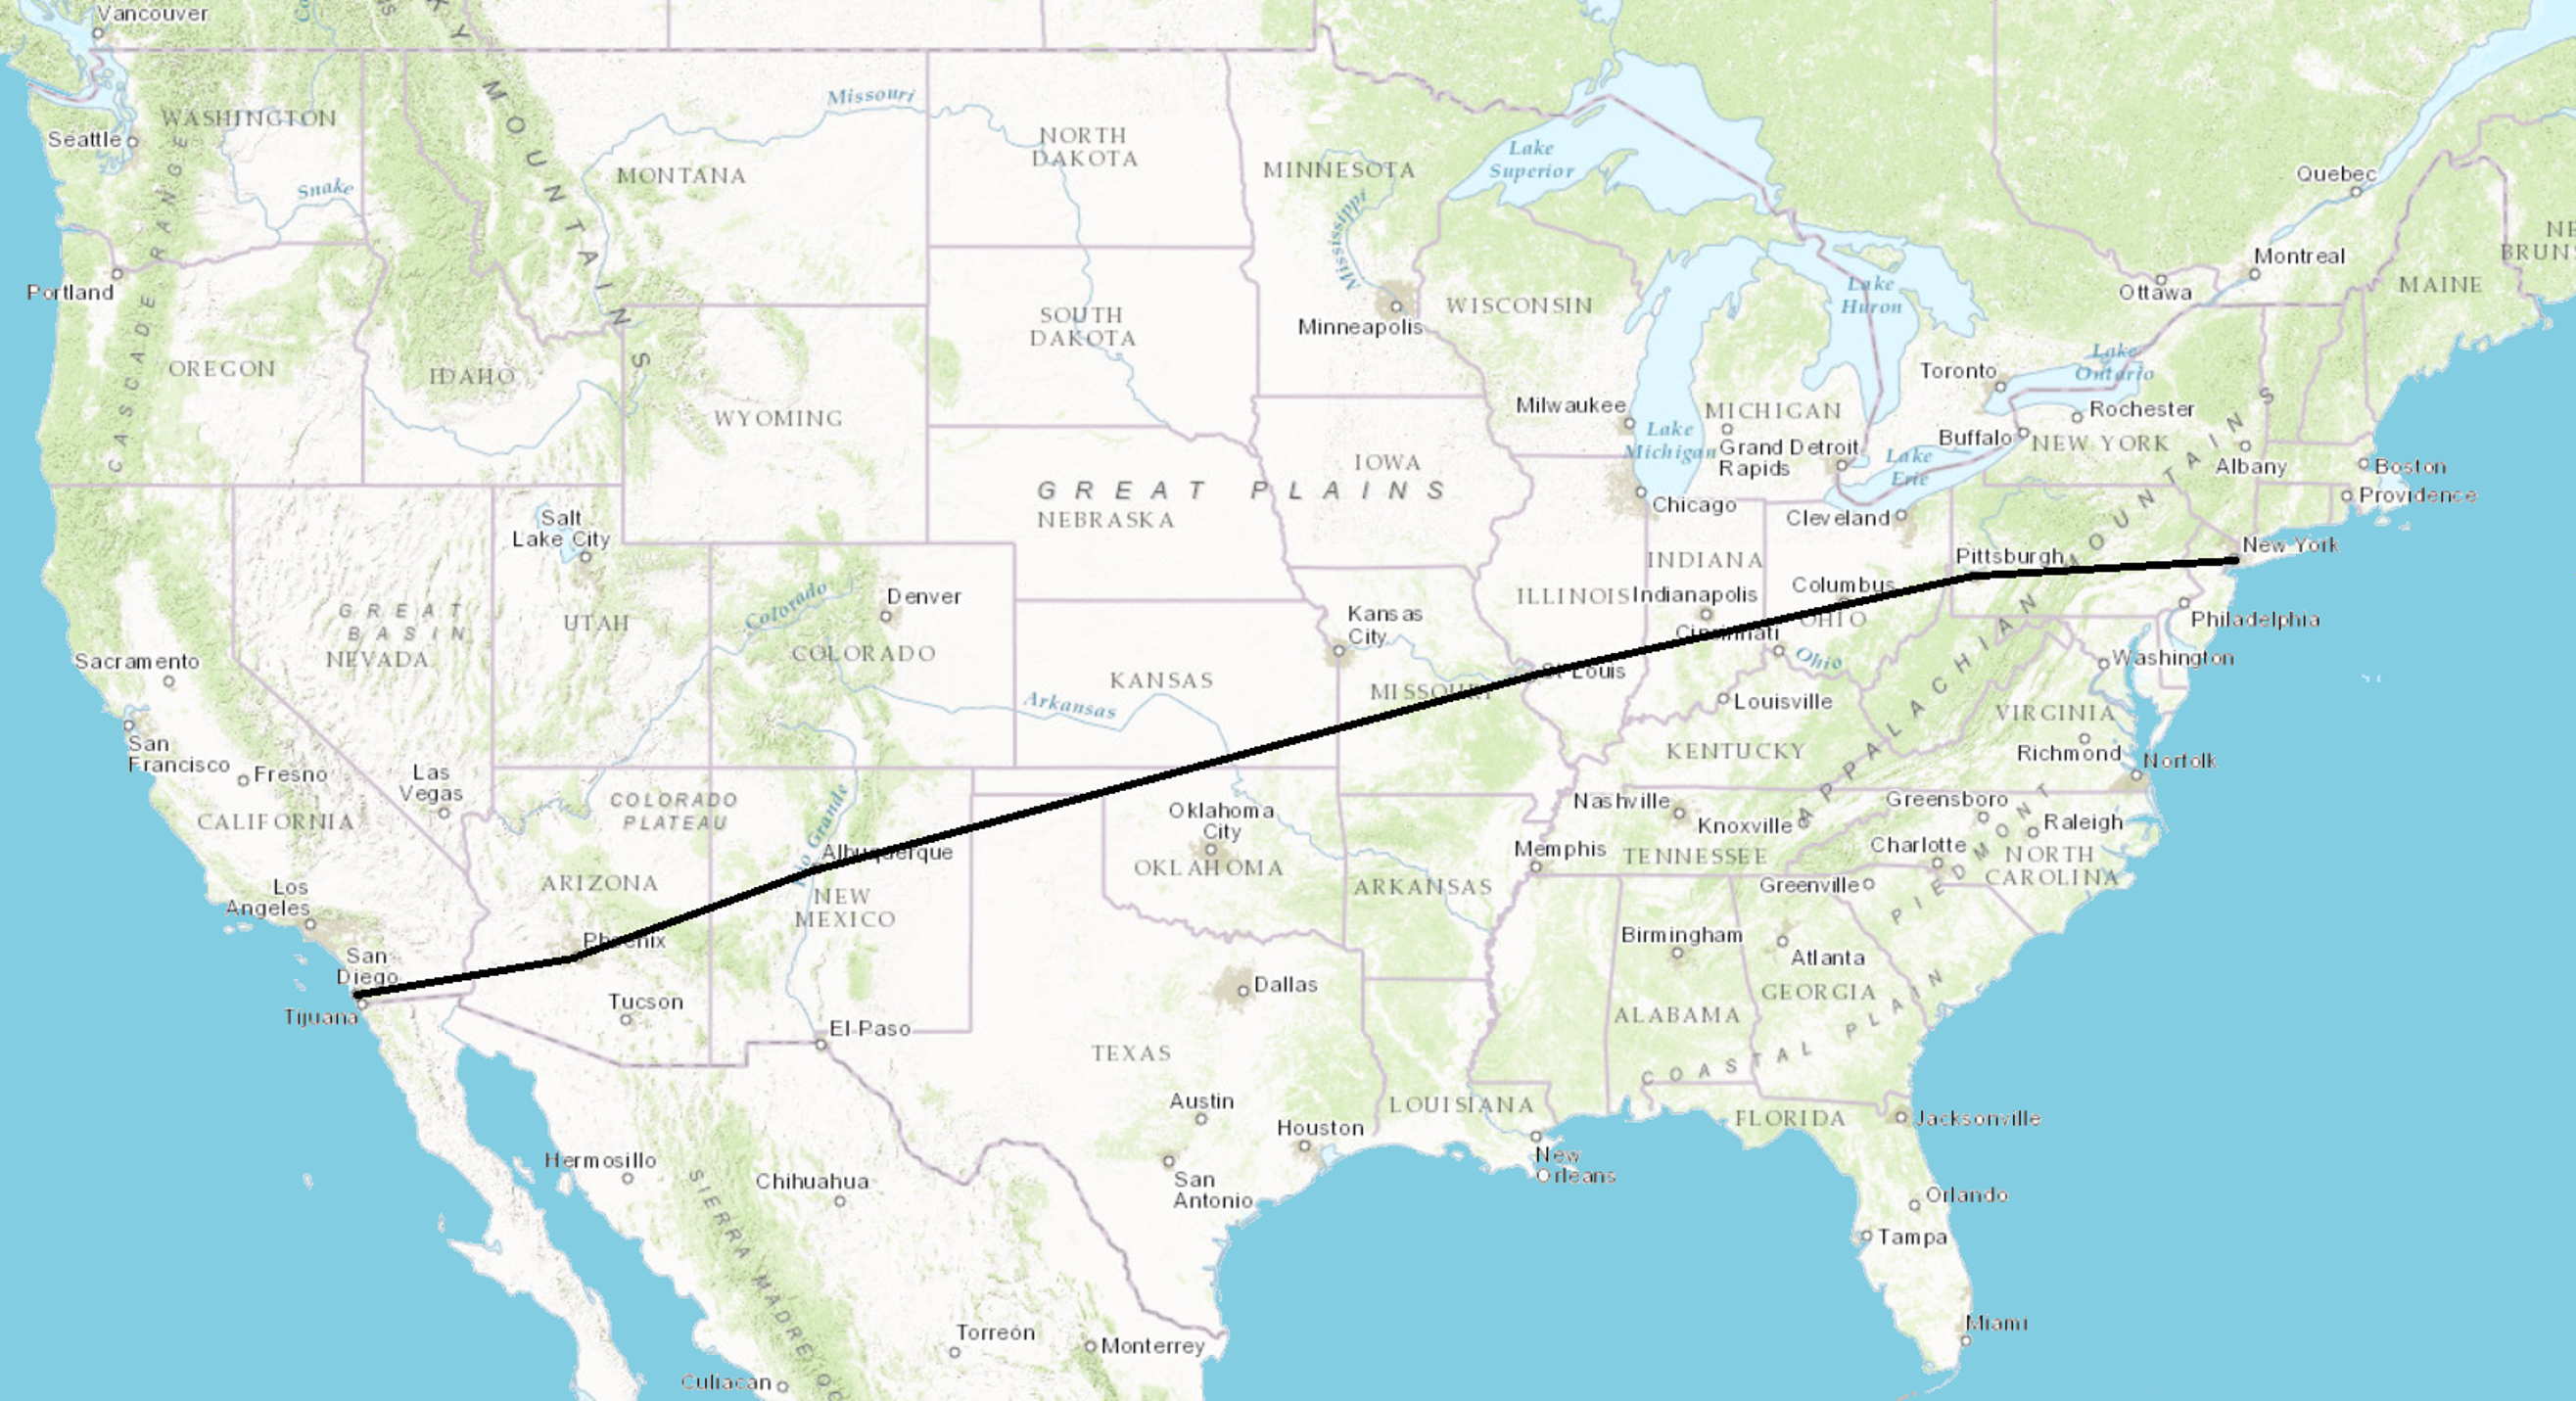 A map of the United States with 5 line segments that represent the distance a plane flew. The first segment is from New York to Pittsburgh, the second segment from Pittsburgh to Saint Louis, the third segment from Saint Louis to Albuquerque, the fourth from Albuquerque to Phoenix, and the fifth from Pheonix to San Diego.